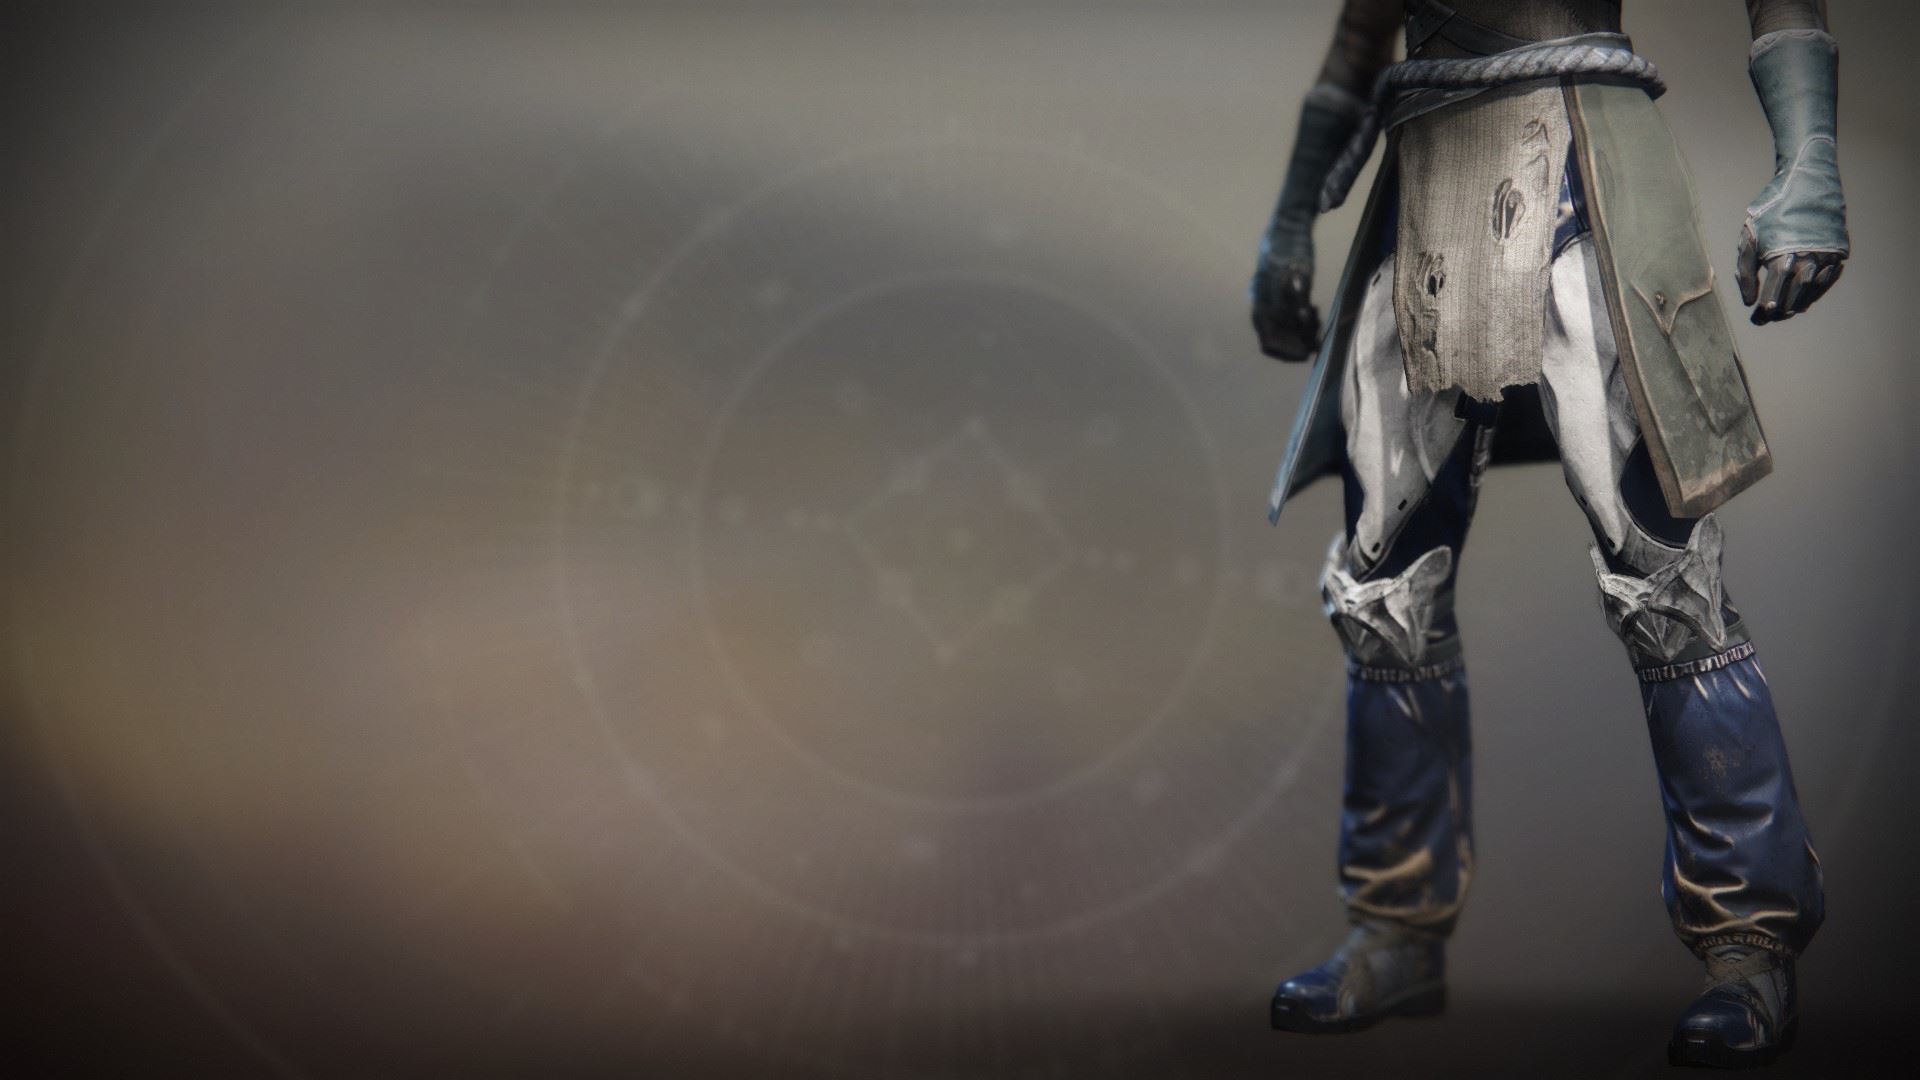 An in-game render of the Dragonfly Regalia Boots.